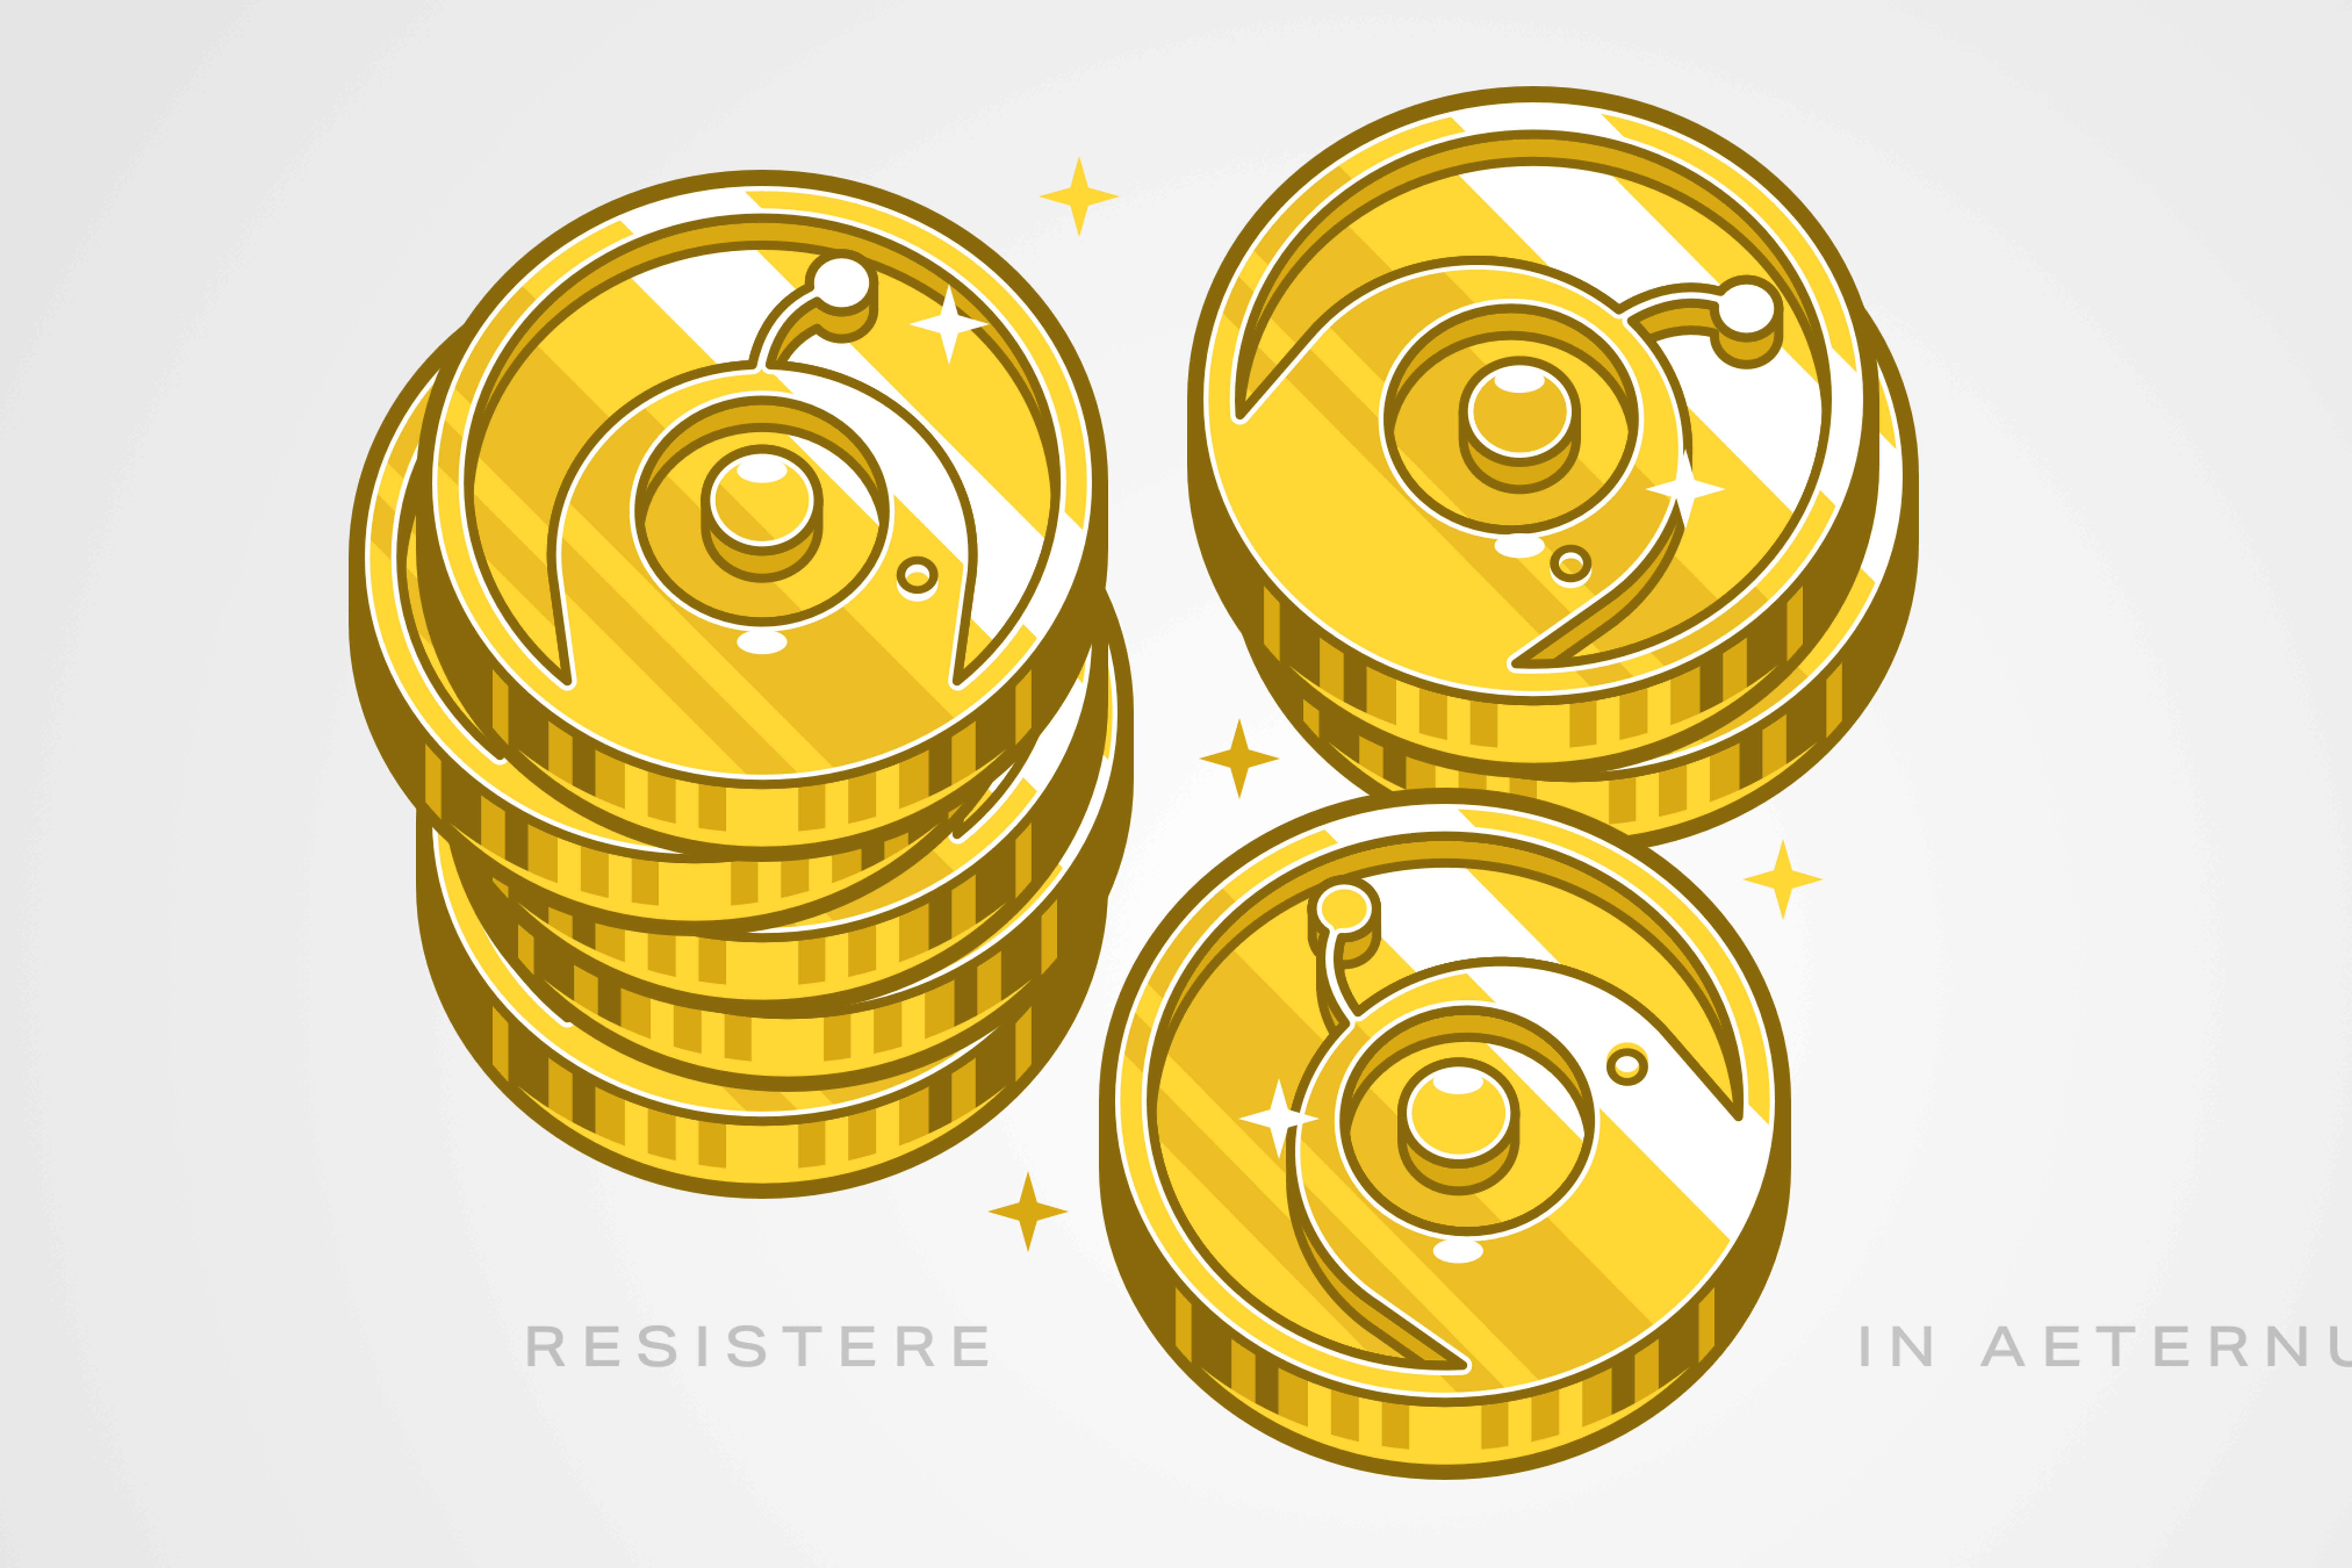 Illustration of Resistbot coins: gold coins with Rosie robots minted into them